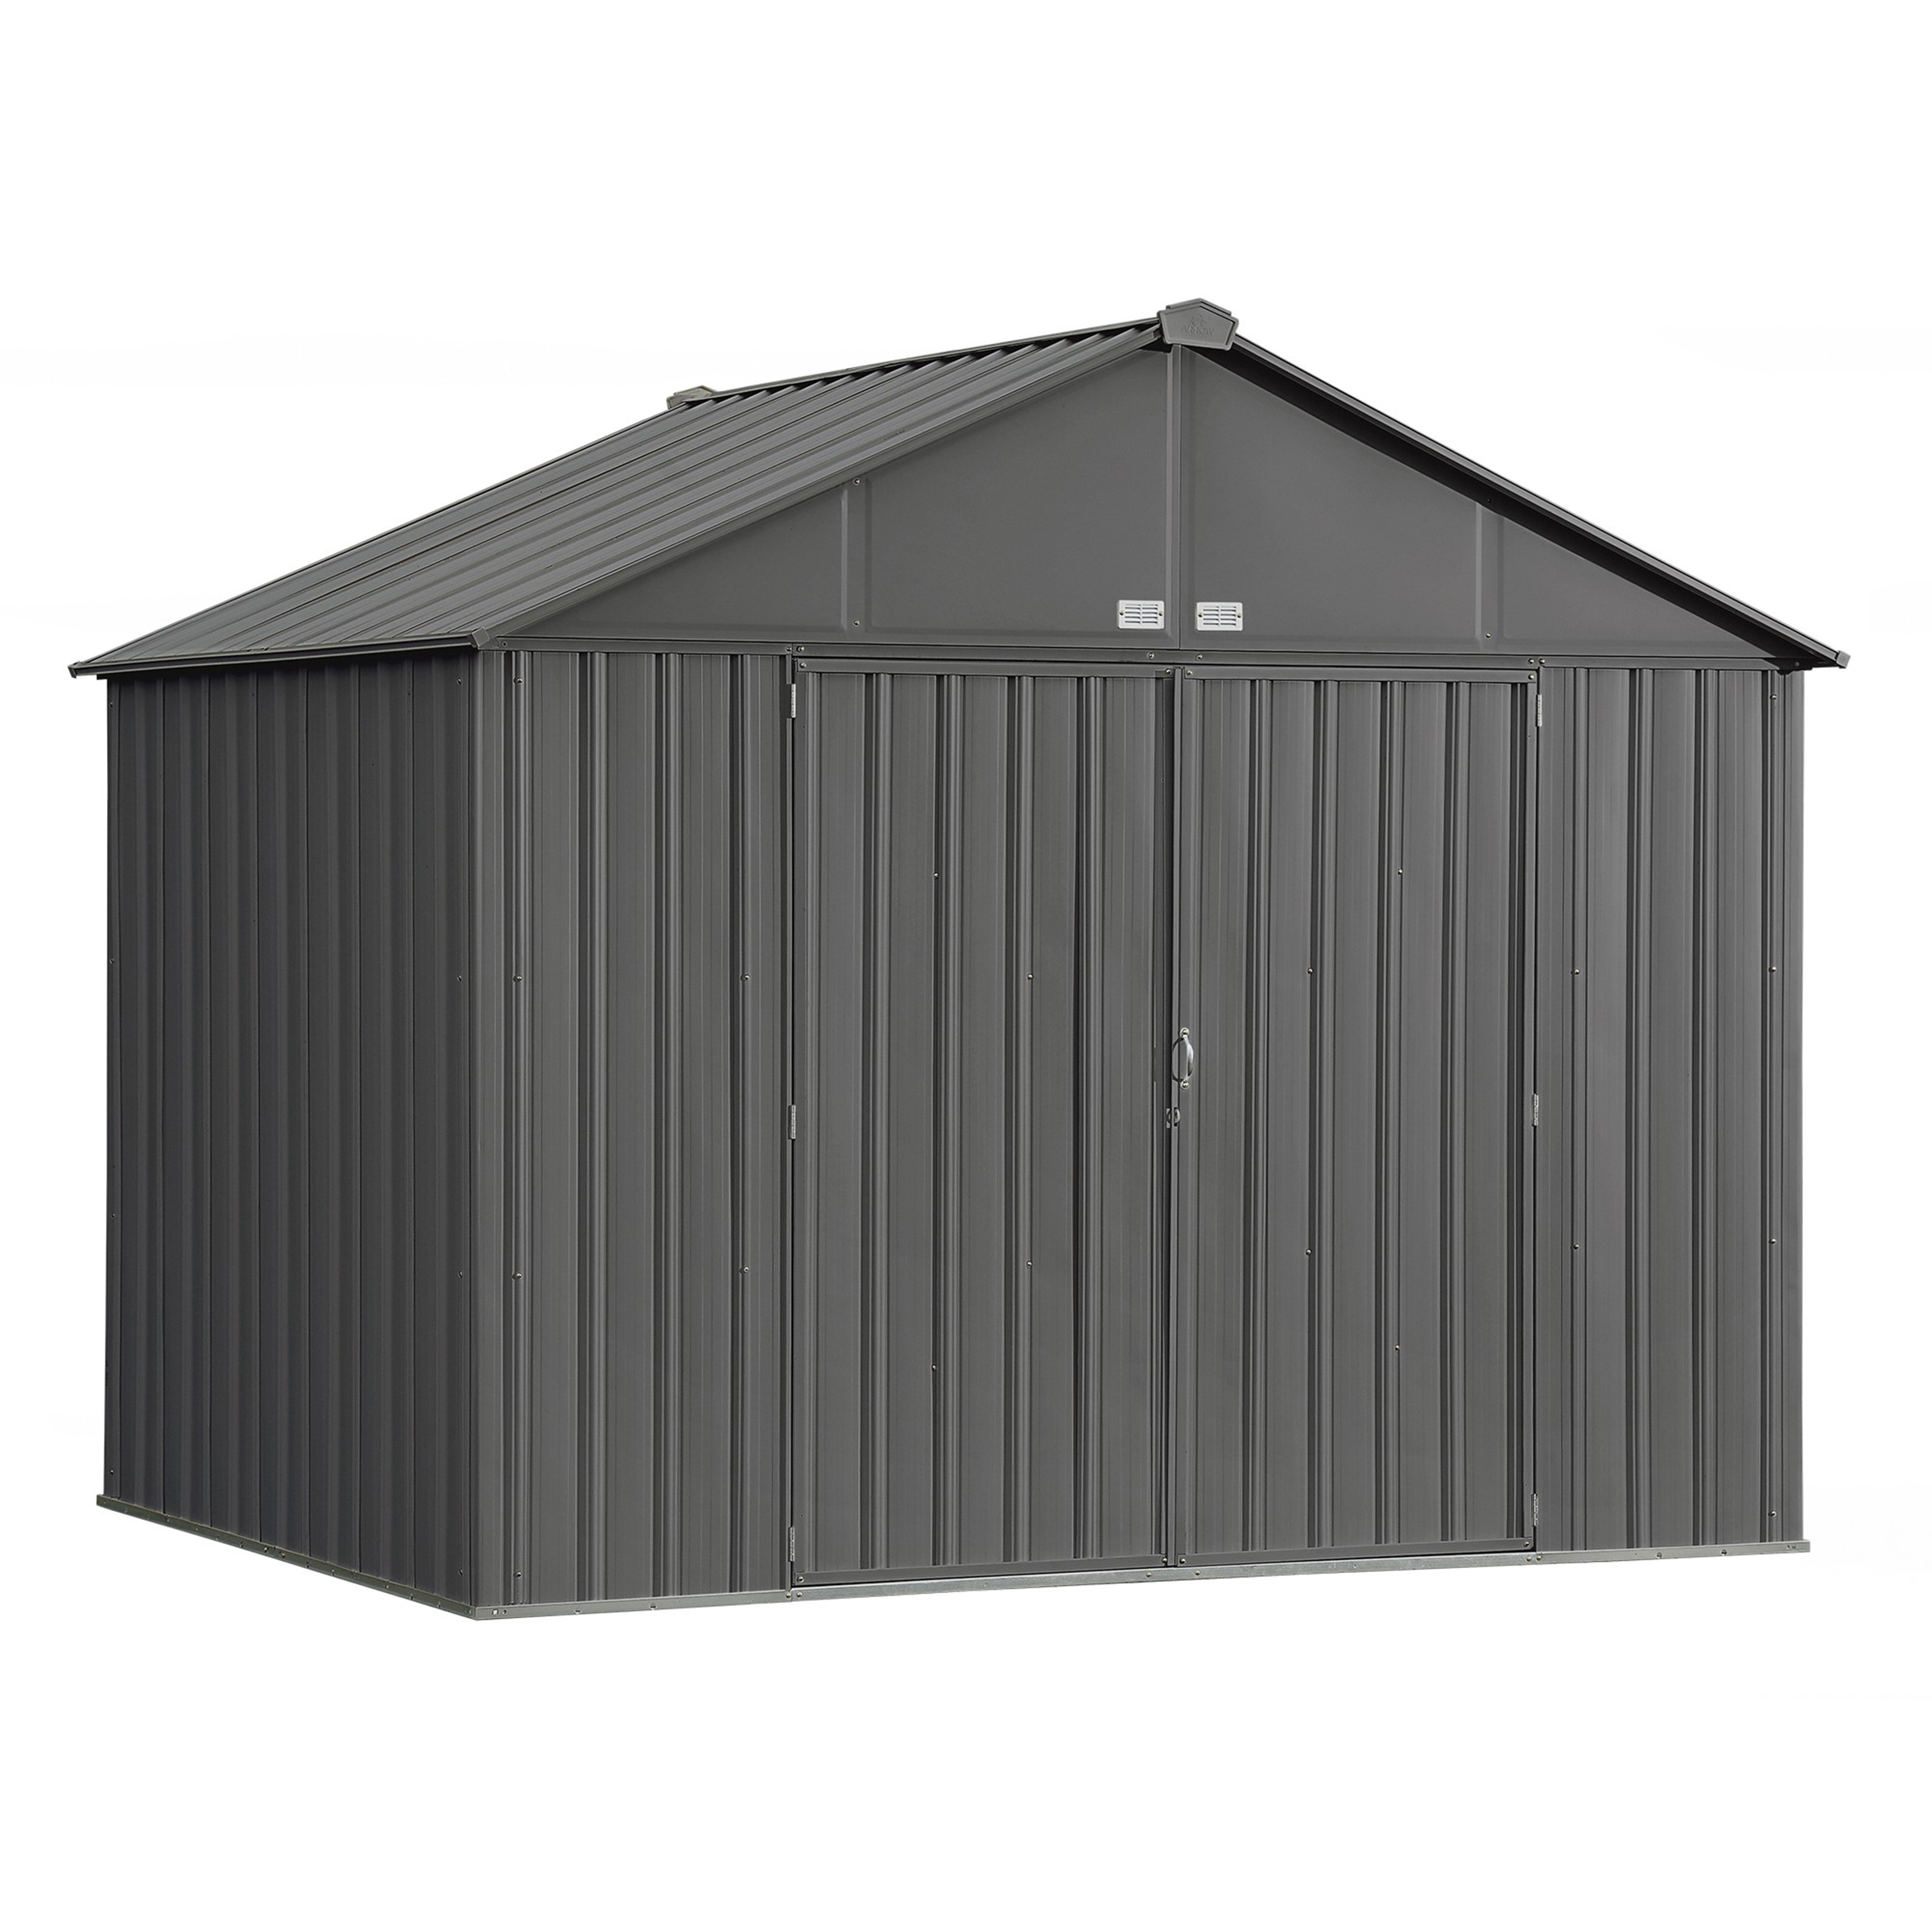 Ezee Shed, 10x8, Extra High Gable, 72 In Walls, Charcoal